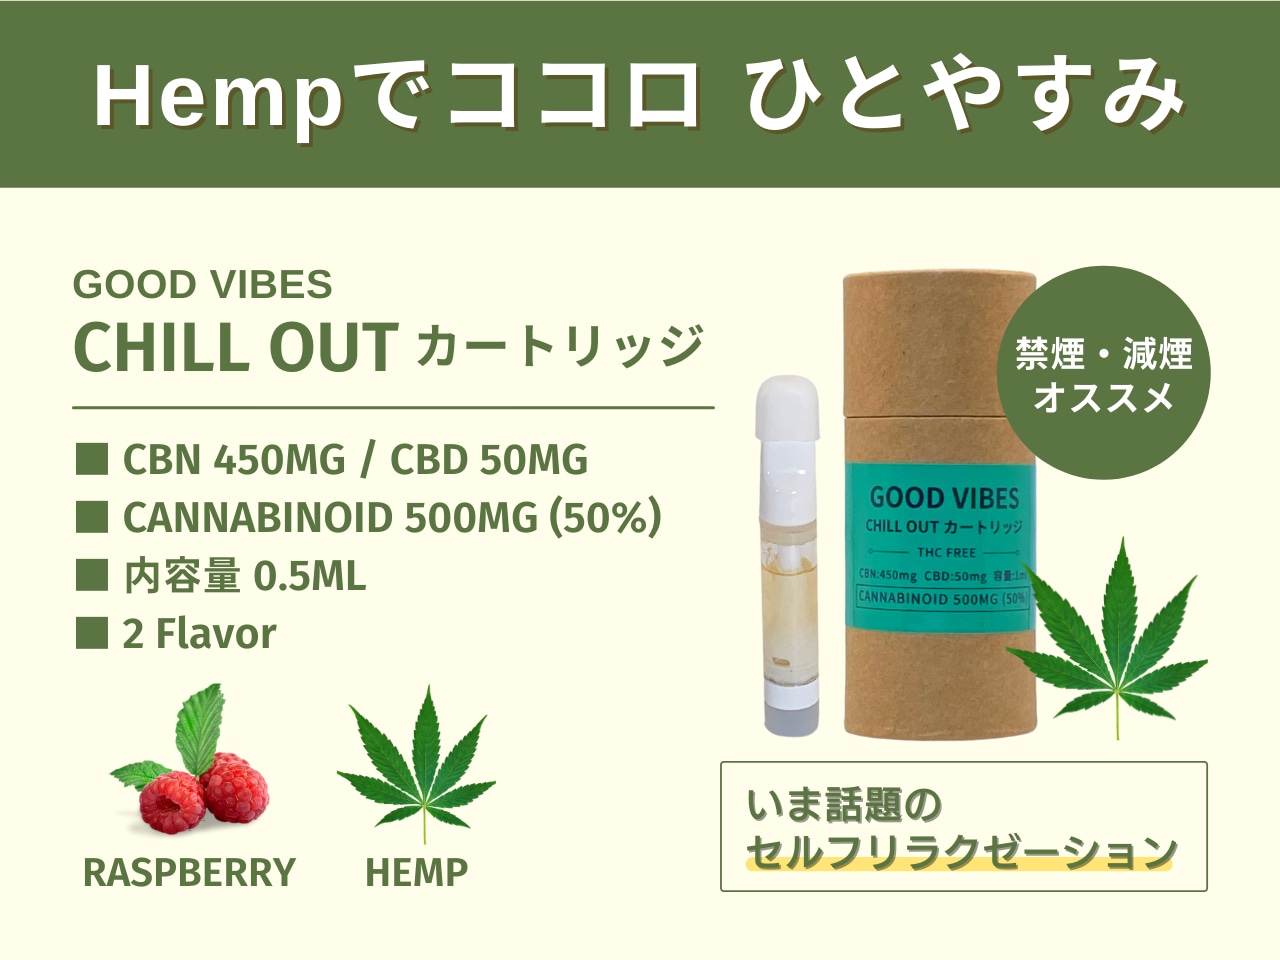 GOOD VIBES  CHILL OUT カートリッジ 0.5ml（ヘンプ）CBN450mg / CBD50mg  高濃度 50%